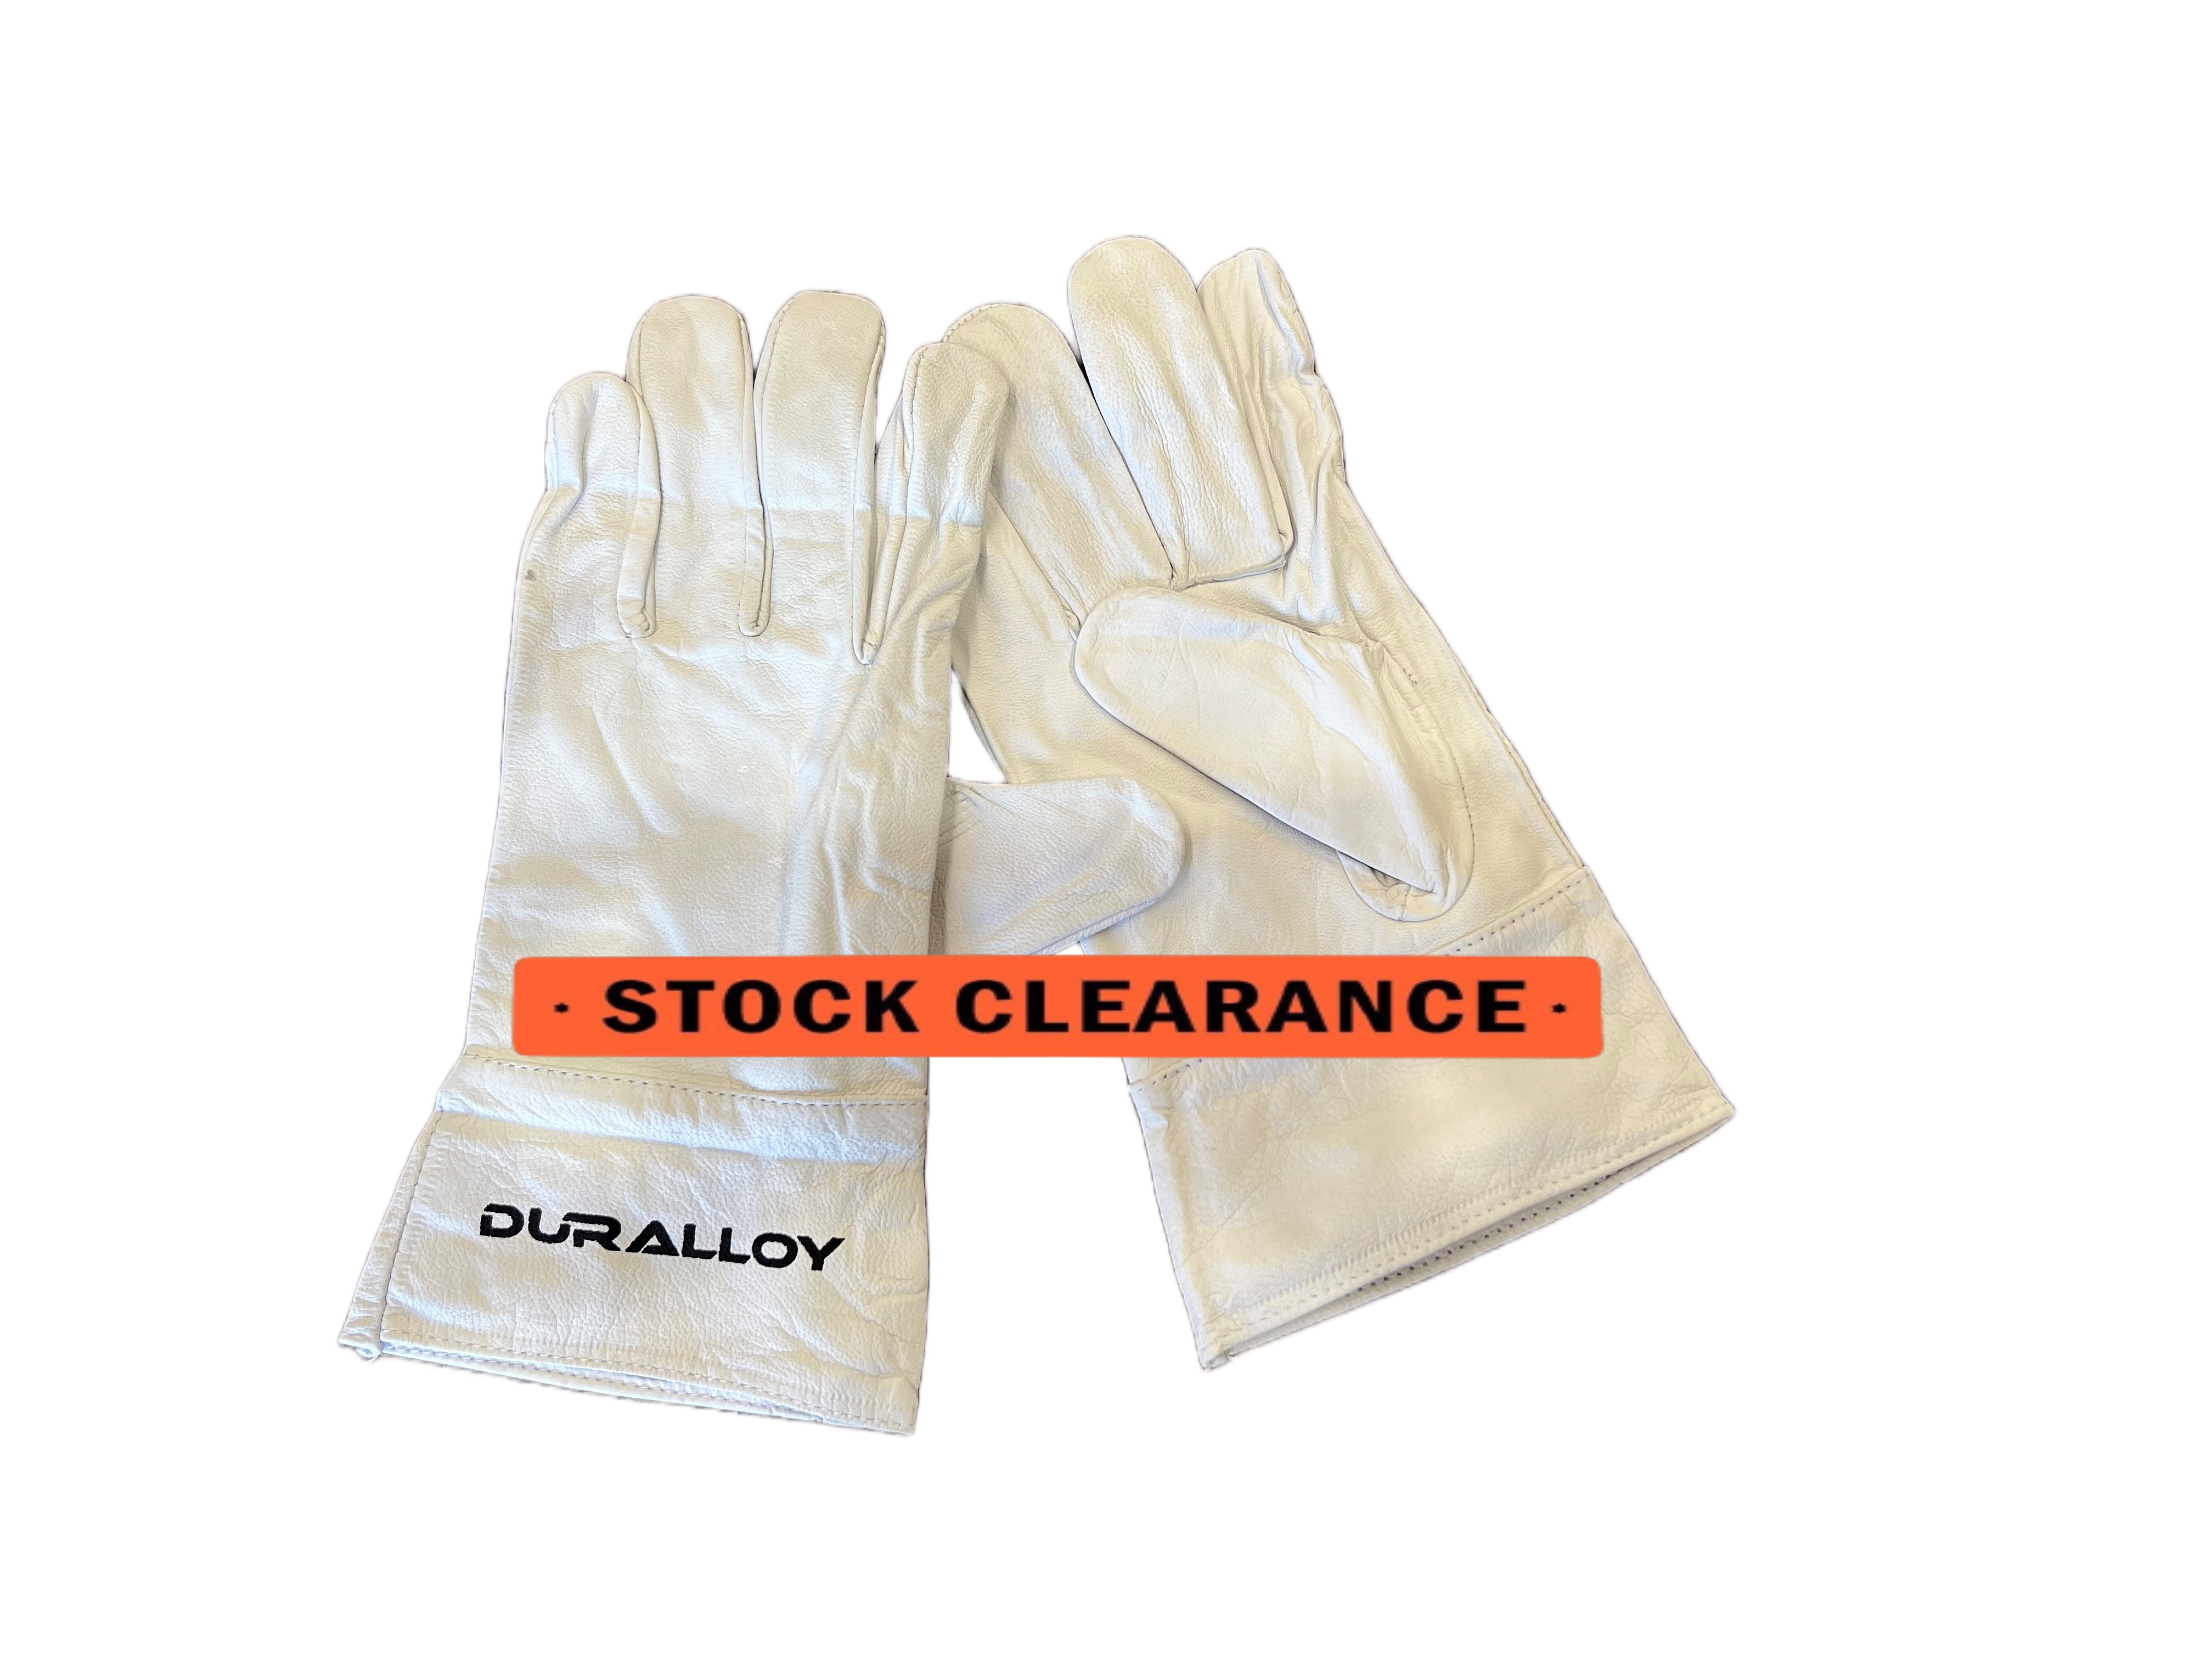 Duralloy Economy full Leather Tig Glove - Clearance